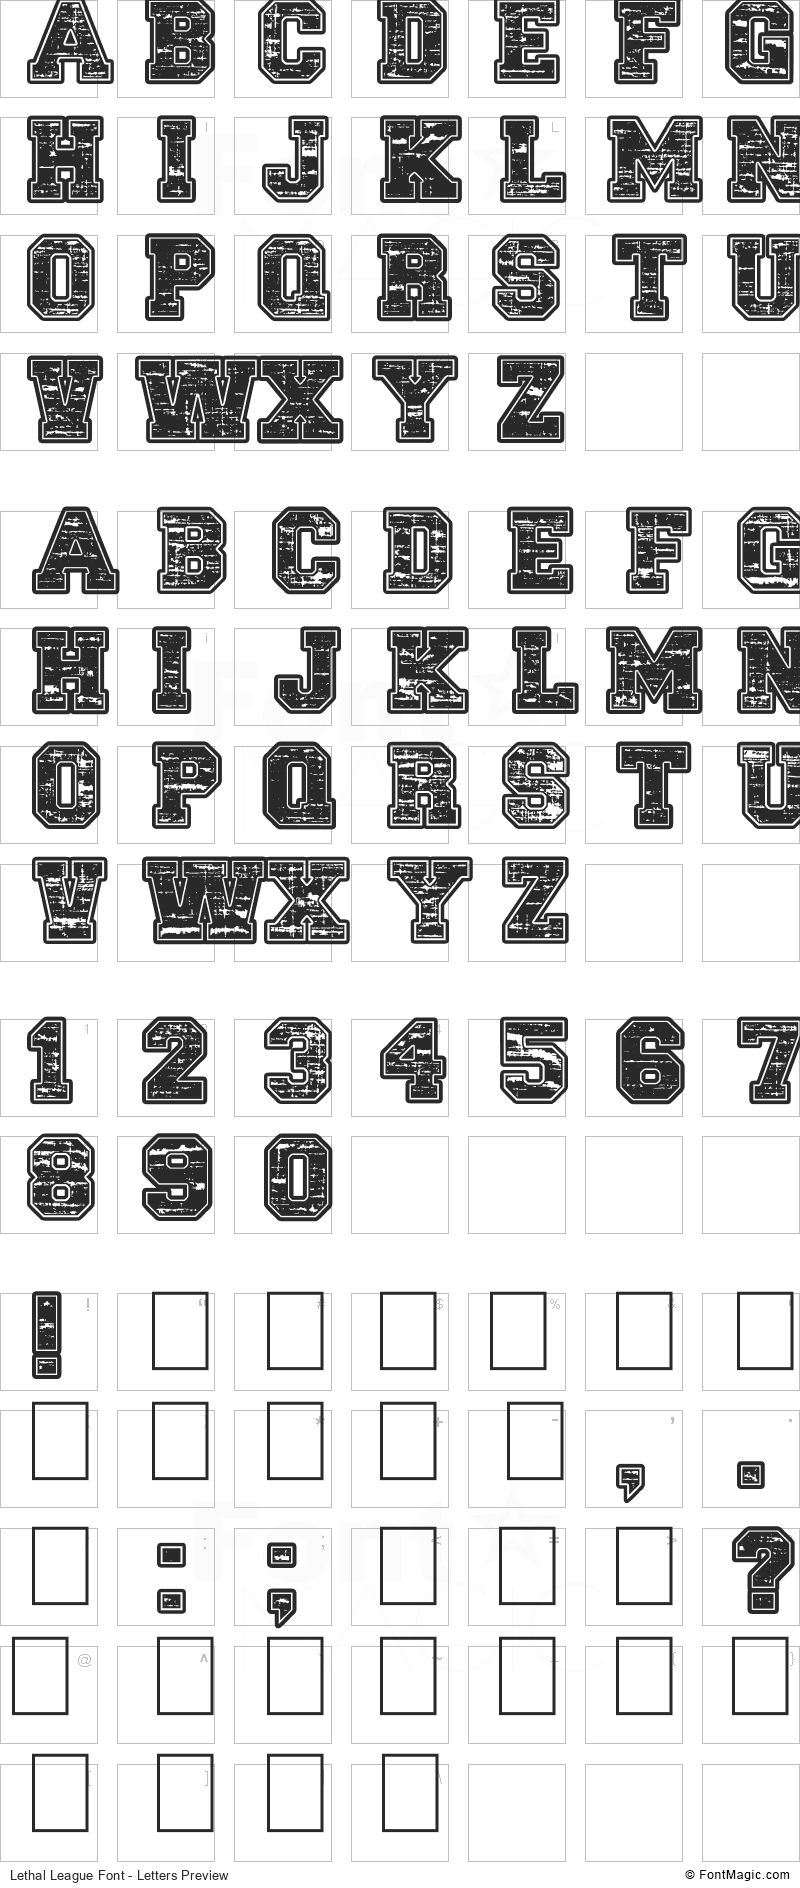 Lethal League Font - All Latters Preview Chart